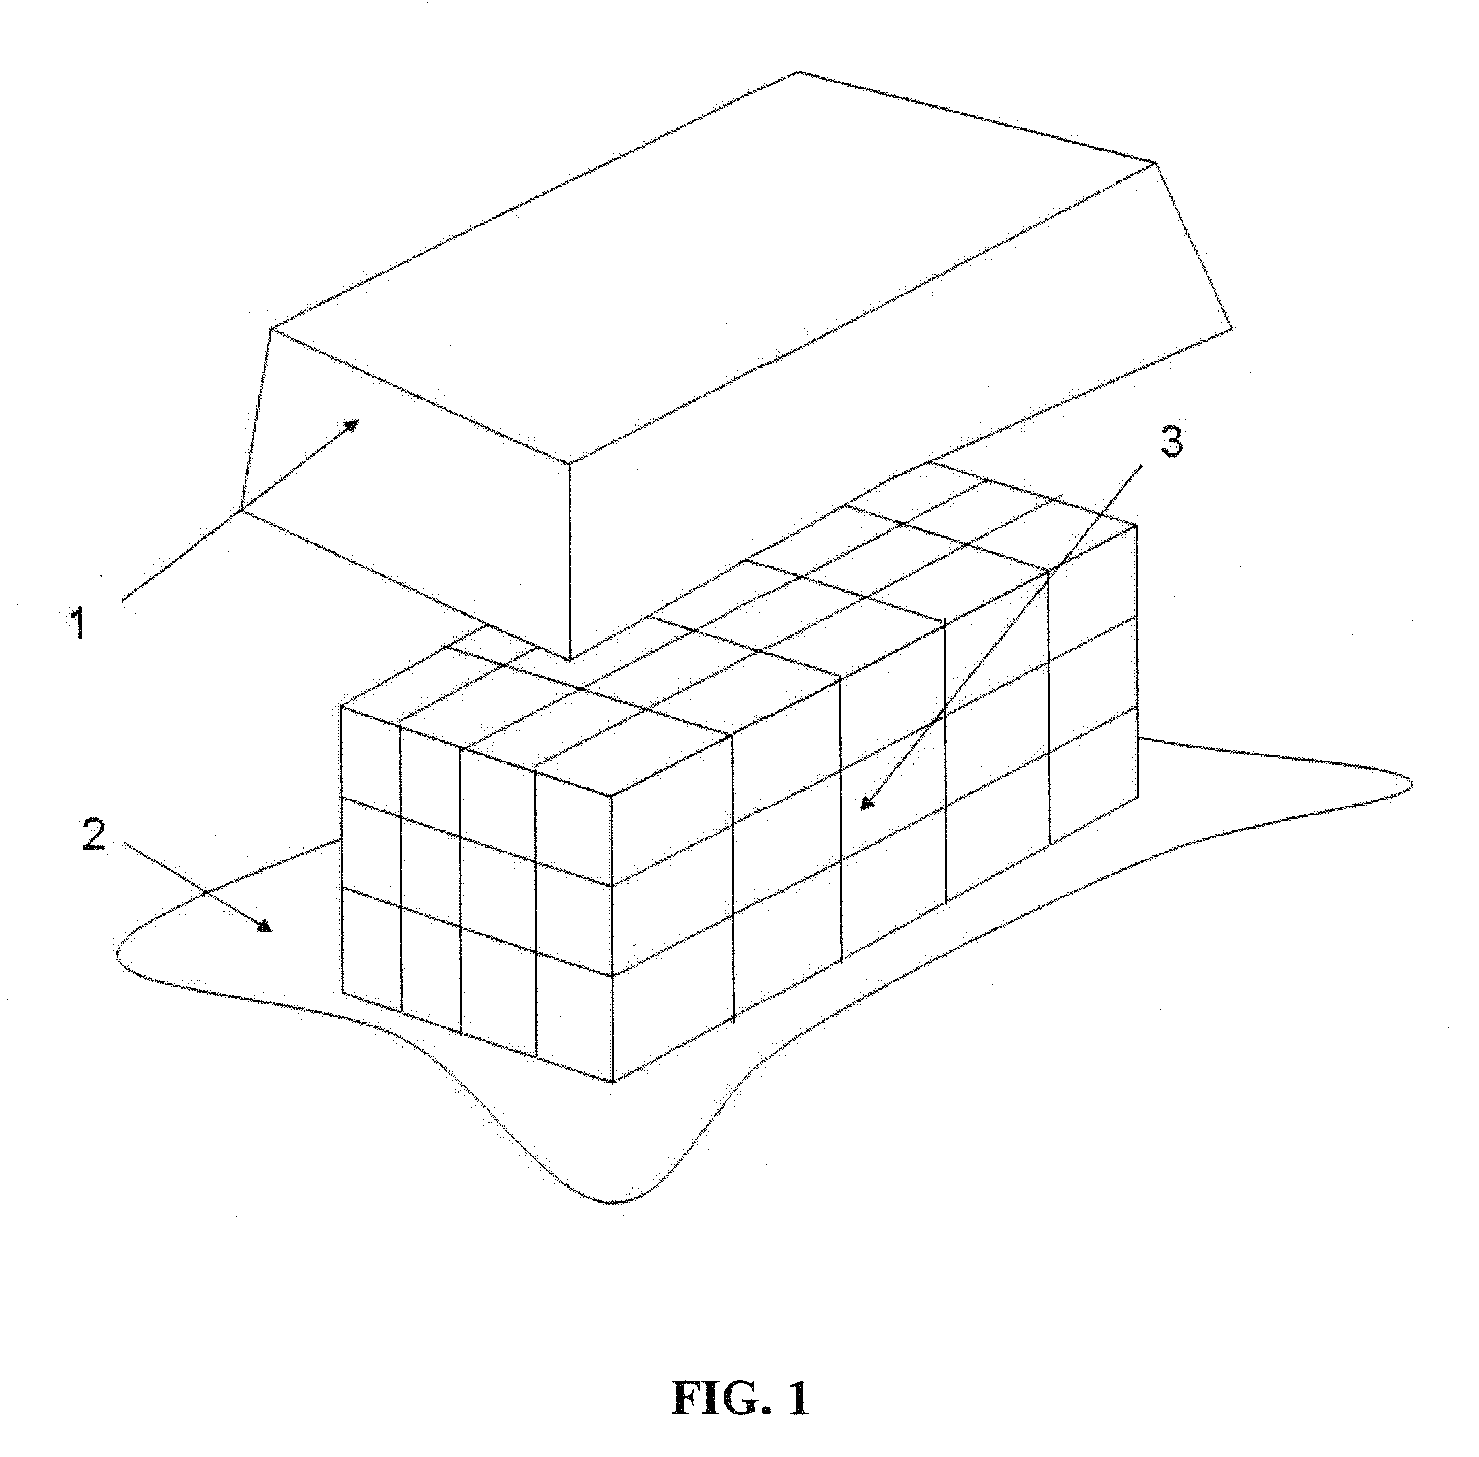 Method and Apparatus for Wrapping a Shipment